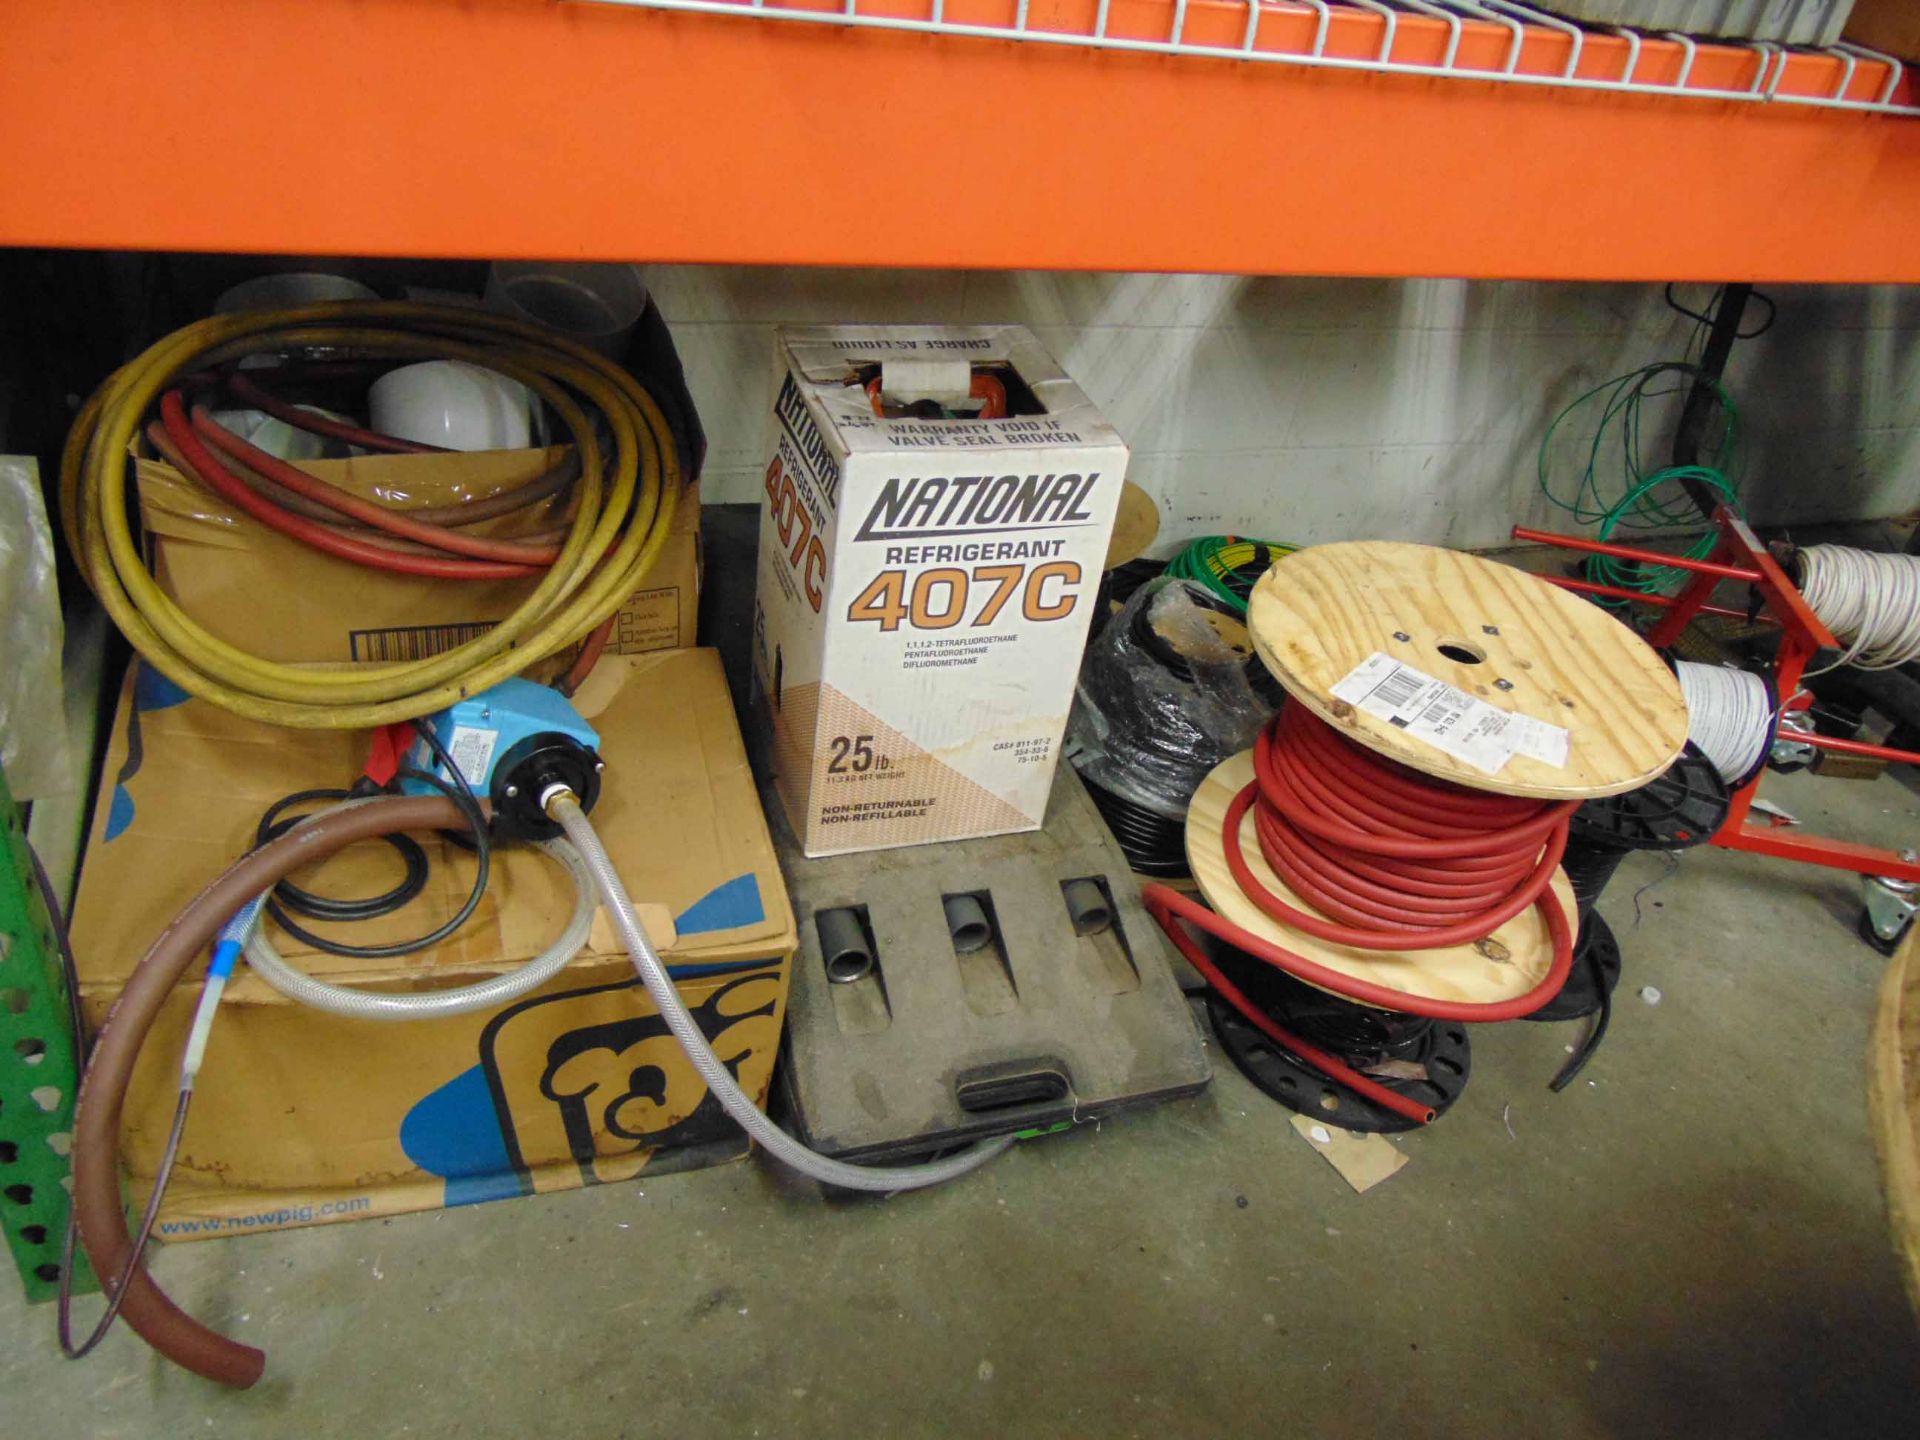 LOT OF MAINTENANCE SUPPLIES, assorted (located on pallet rack) - Image 2 of 2